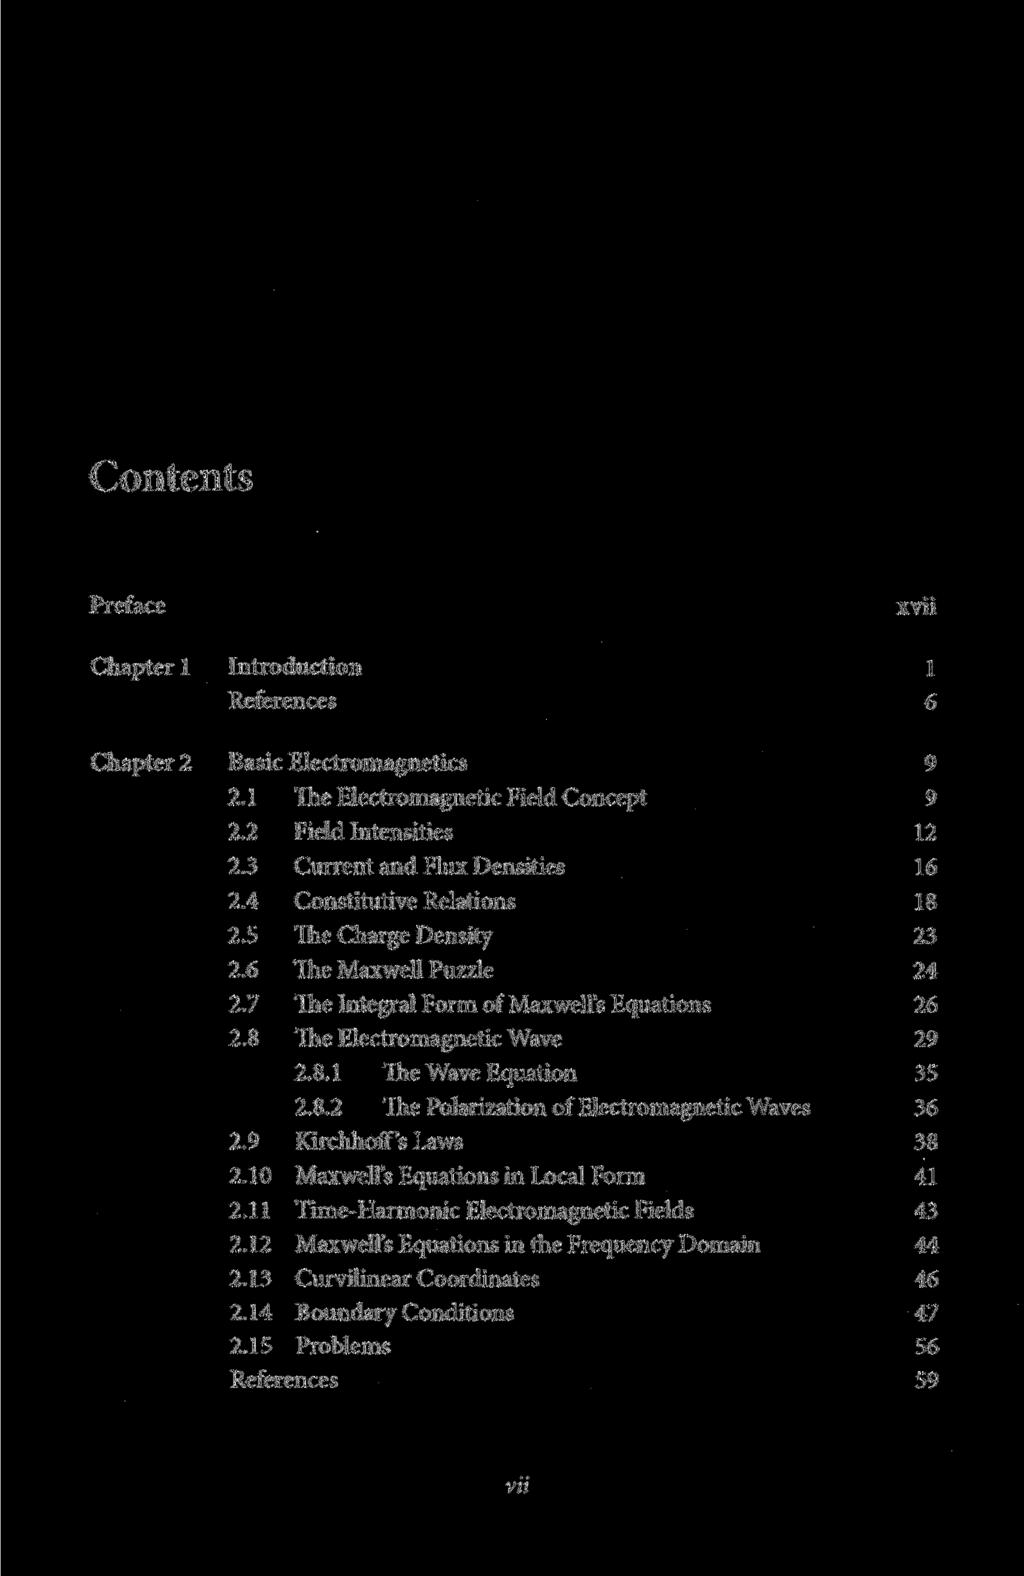 Contents Preface xvii Chapter 1 Introduction 1 References 6 Chapter 2 Basic Electromagnetics 9 2.1 The Electromagnetic Field Concept 9 2.2 Field Intensities 12 2.3 Current and Flux Densities 16 2.